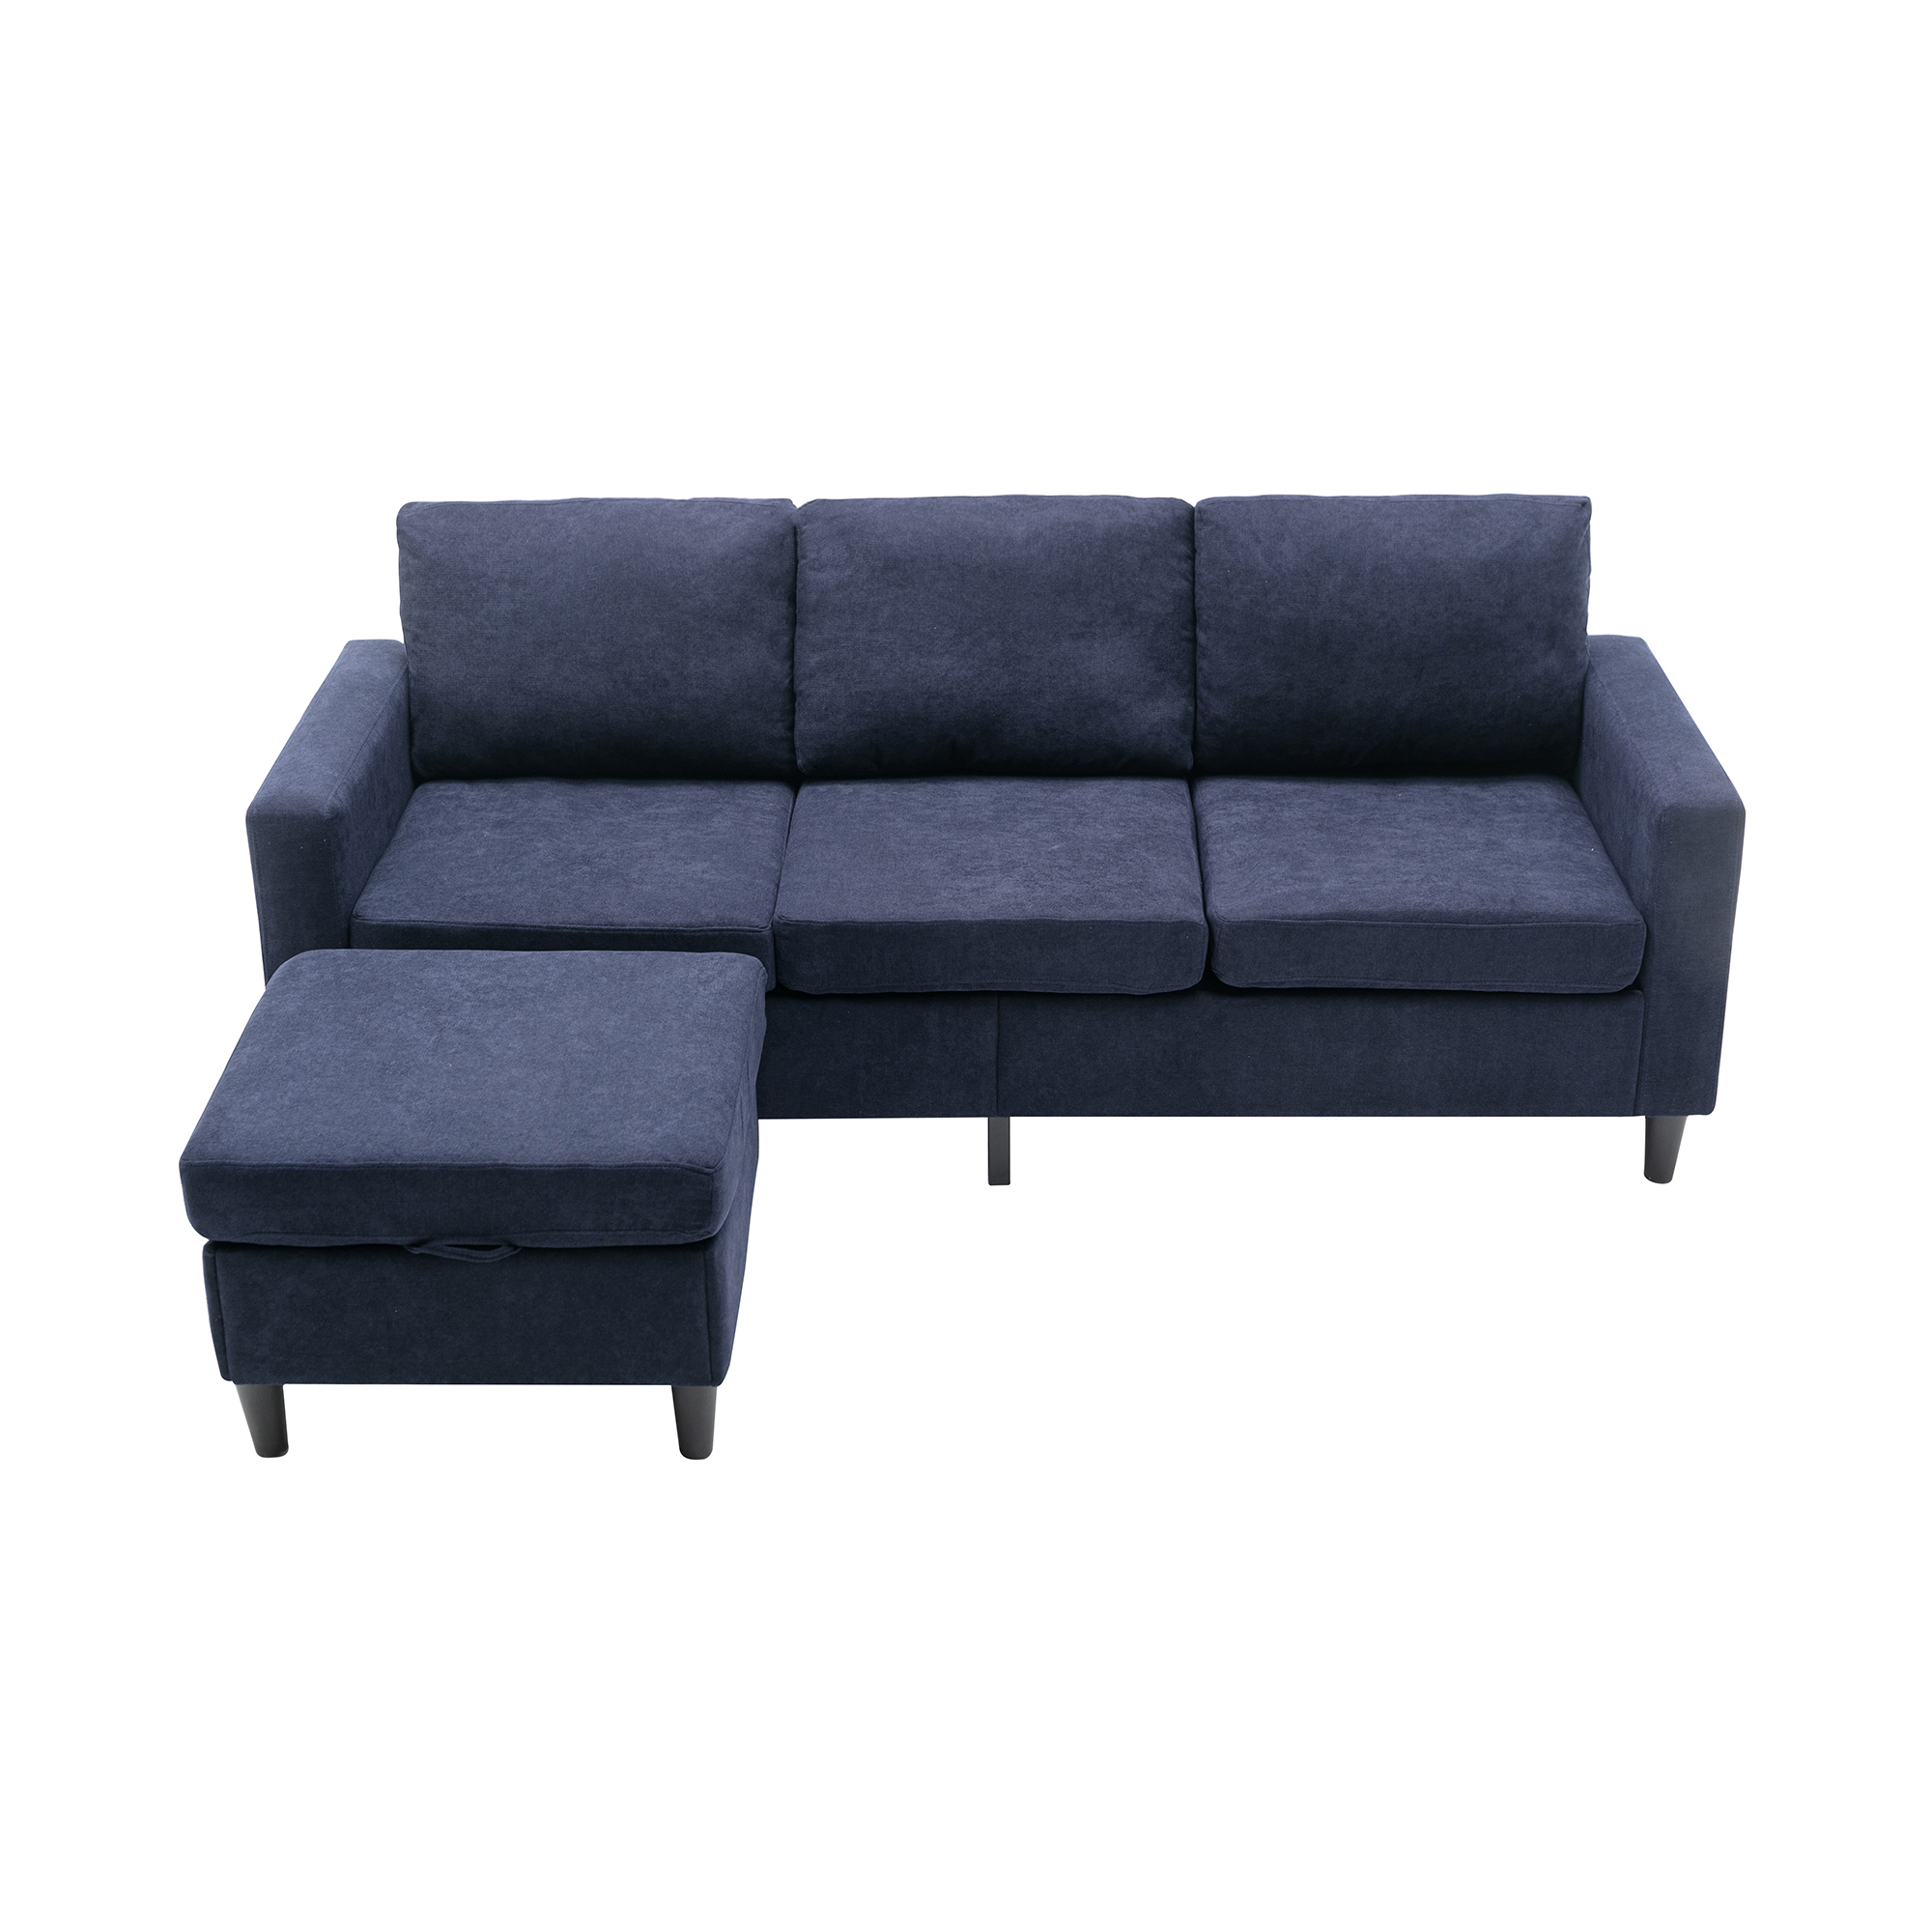 

new Living Room Furniture Sectional Sofa Handy Side Pocket LivingRoom L-Shape 3-Seater Couch with Movable Ottoman for Small Space hot